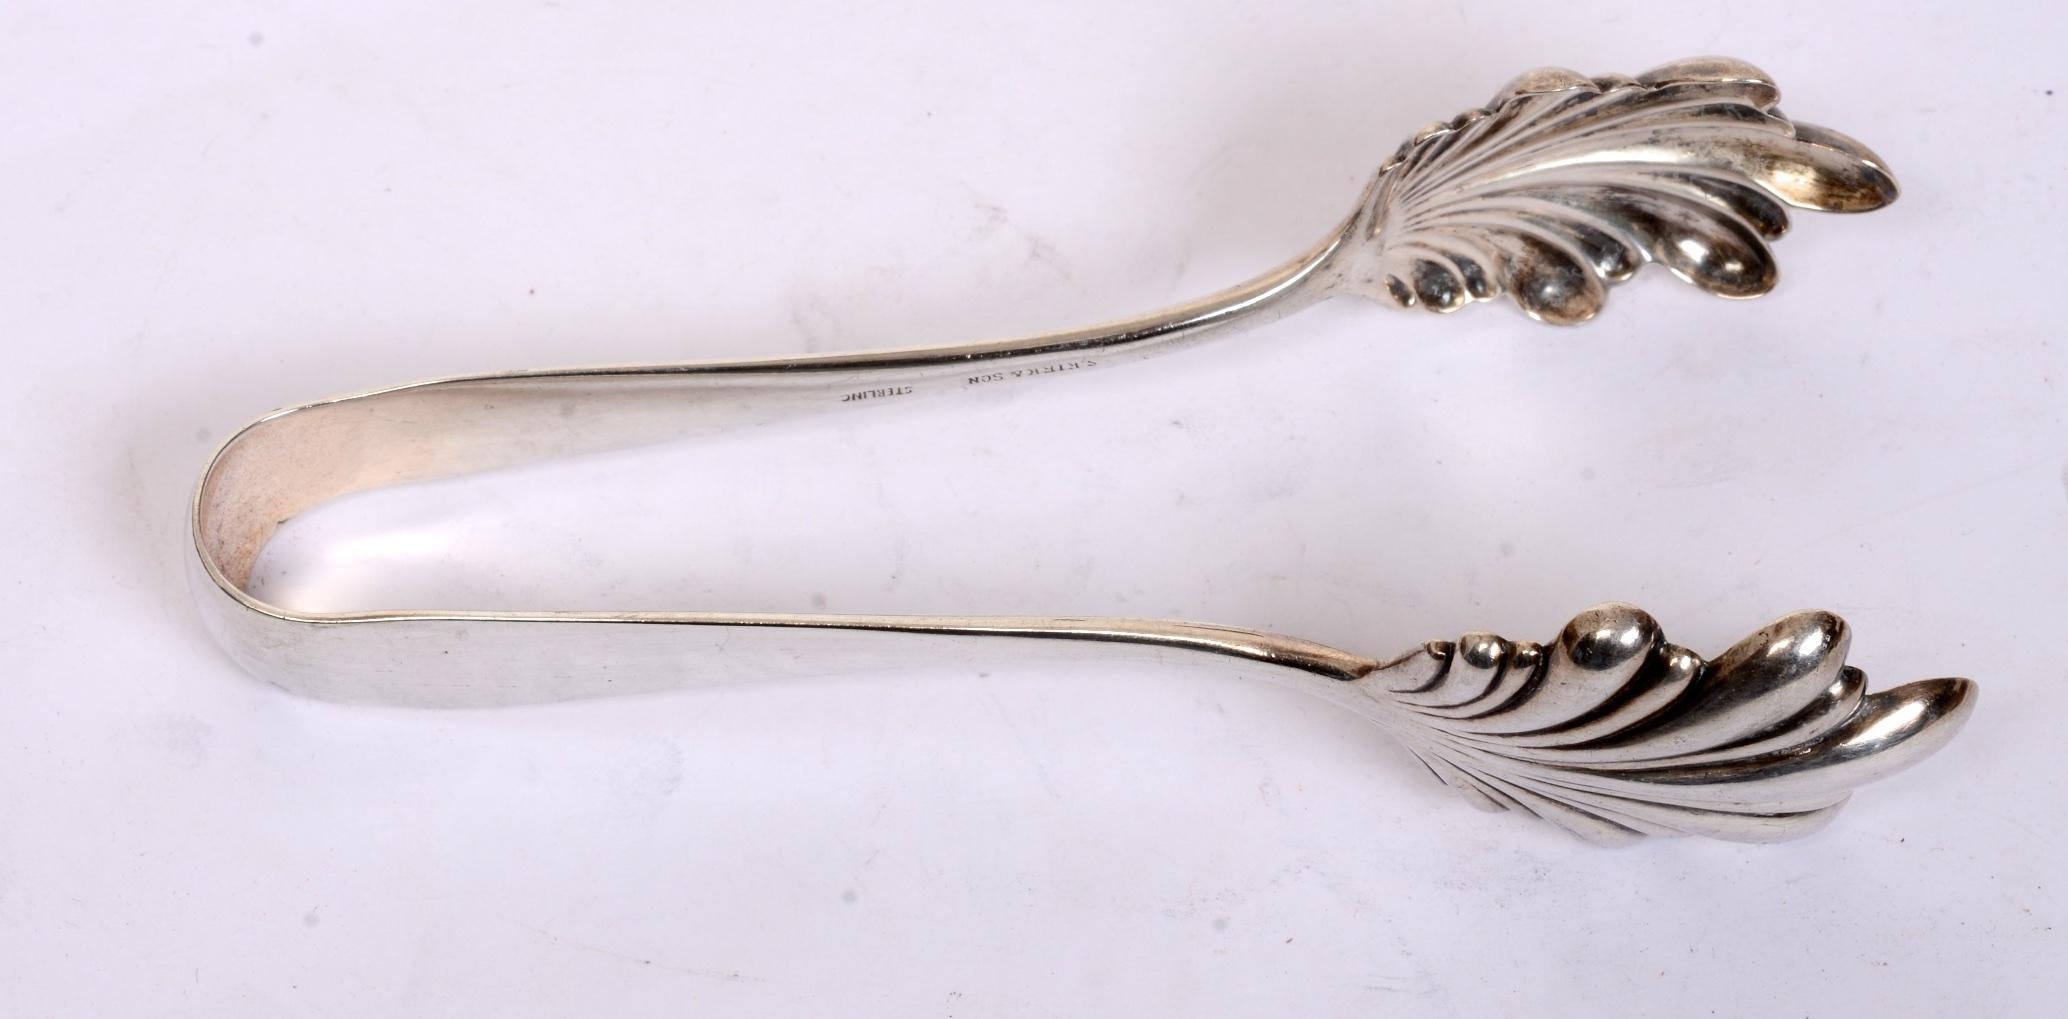 Sterling silver ice tongs by Kirk, “Old Maryland Plain”, late 19th century. This pattern, originally designed in 1850, is one of the oldest patterns of Baltimore silver. Because it is so simple, it can be used in both colonial or contemporary